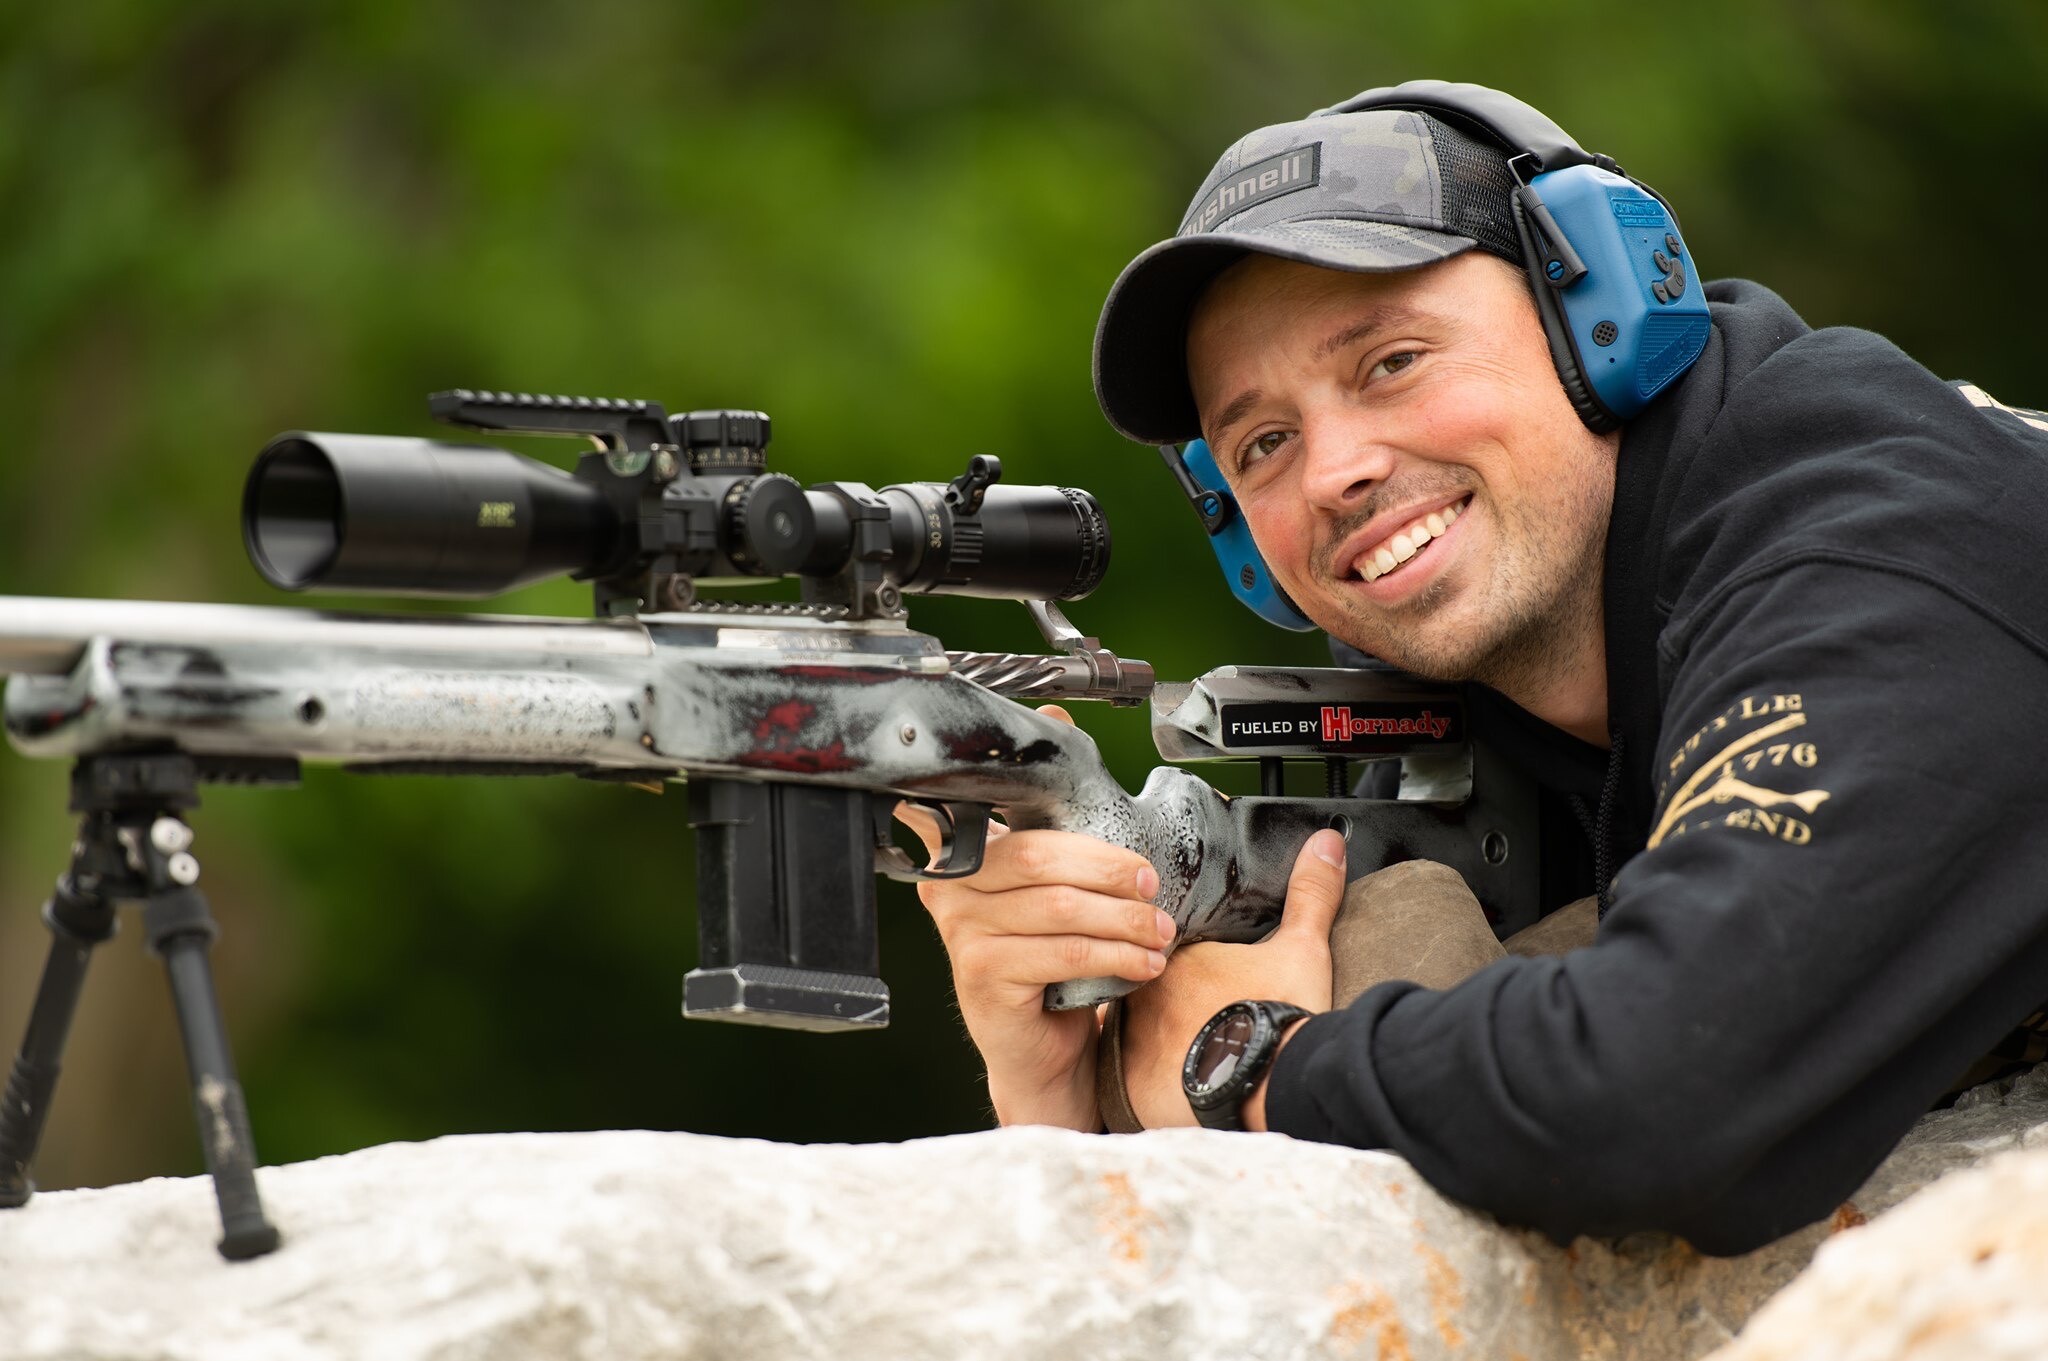 A competitive shooter behind a rifle on a bipod, having fun and not worrying about performing well in a competition.